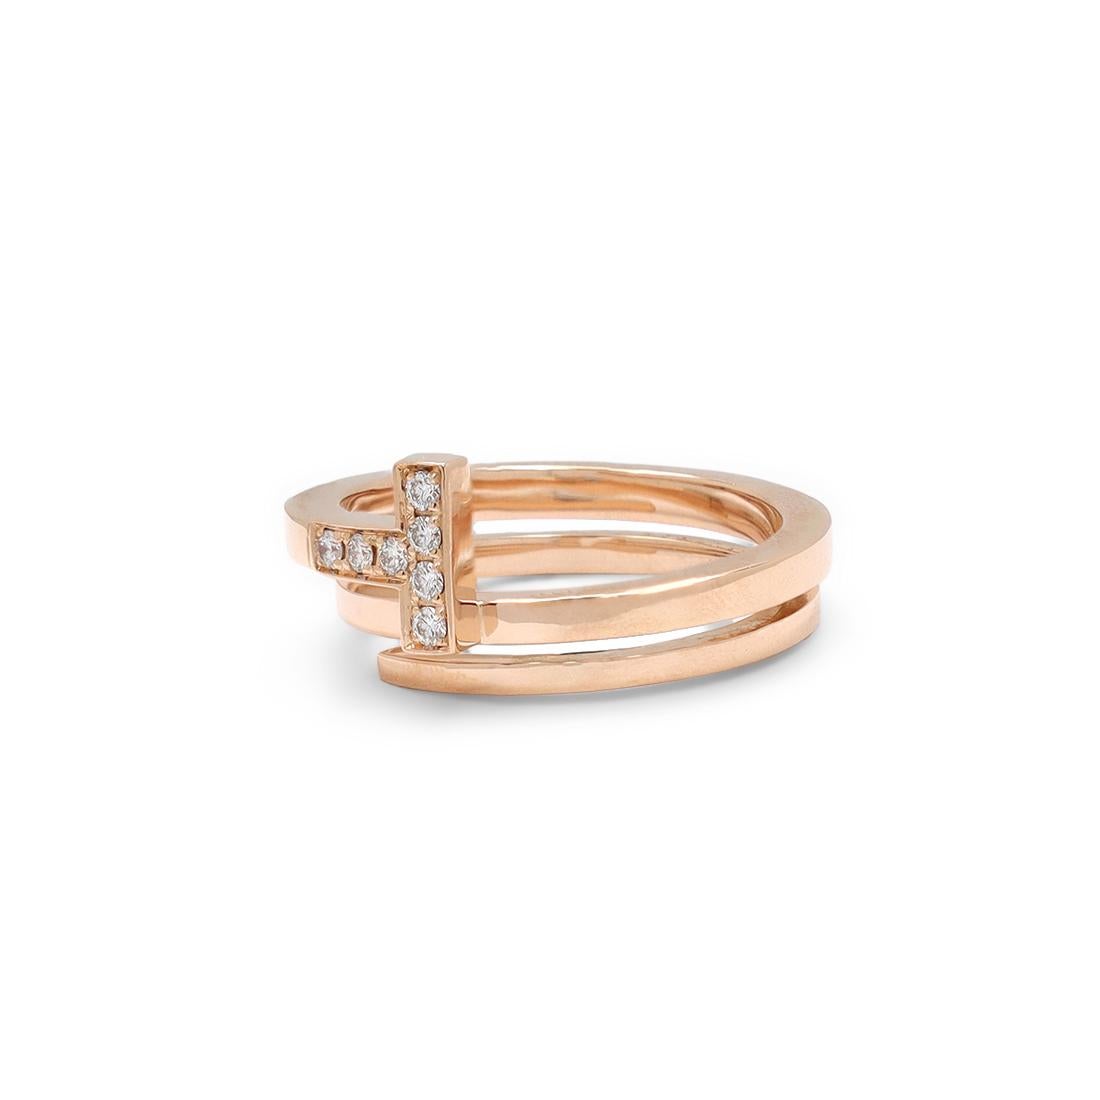 Authentic Tiffany & Co. 'Tiffany T' square wrap ring crafted in 18 karat rose gold and accented with an estimated 0.10 carats of high quality (E-F color, VS clarity) round brilliant cut diamonds. Signed T&Co., Au750, Italy. Ring size 6 1/2 US, 54